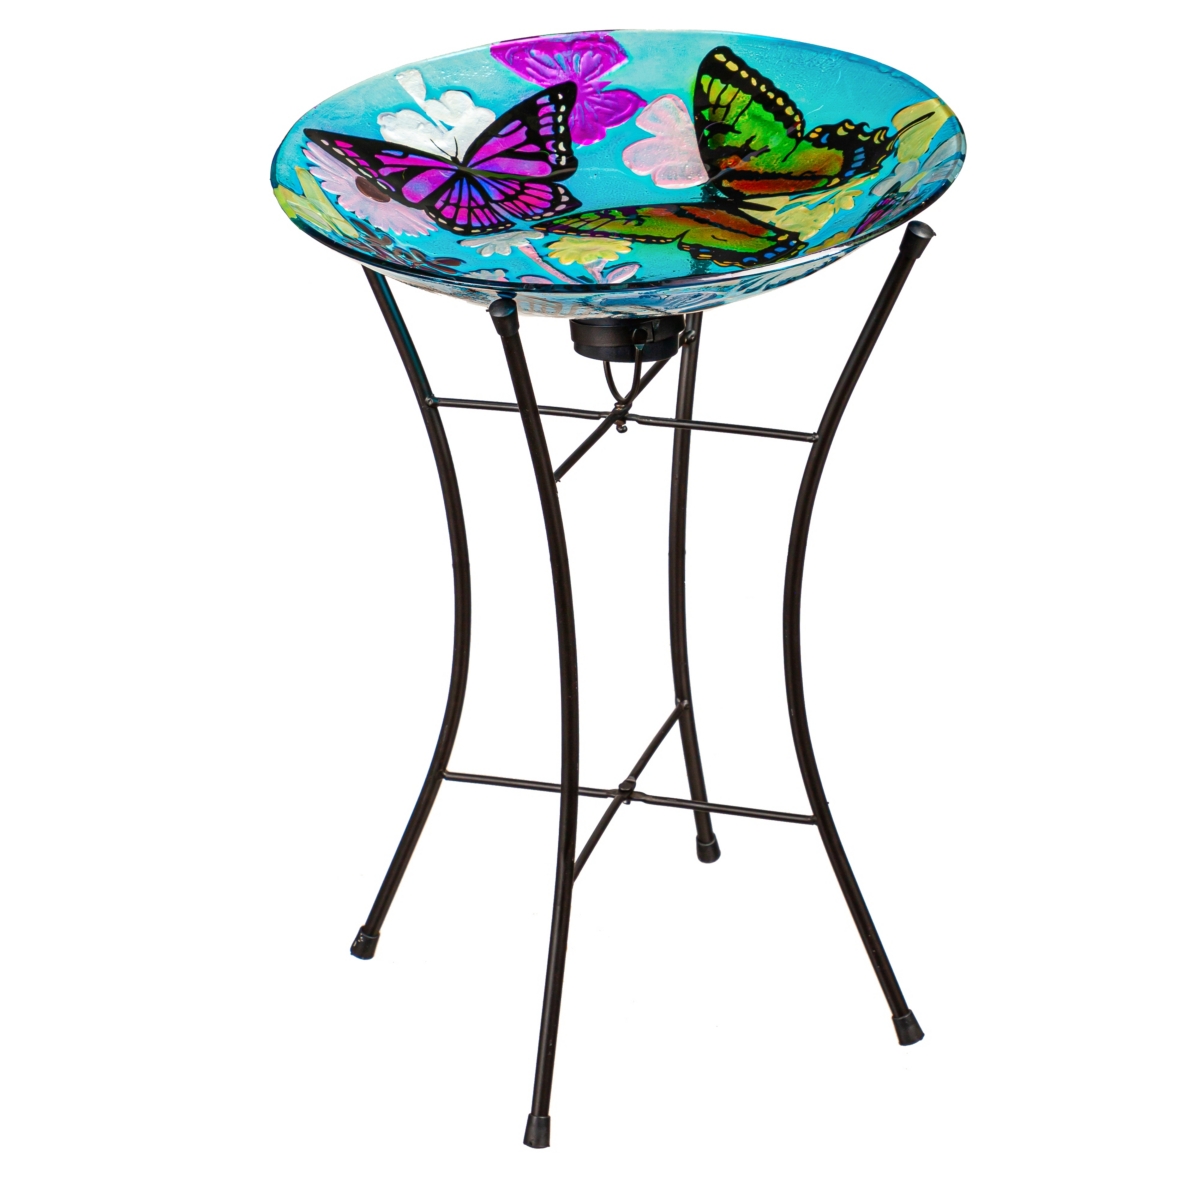 Evergreen 15" Hand Painted Embossed Glass Bird Bath With Solar Stand, Bountiful Butterfly In Multicolored